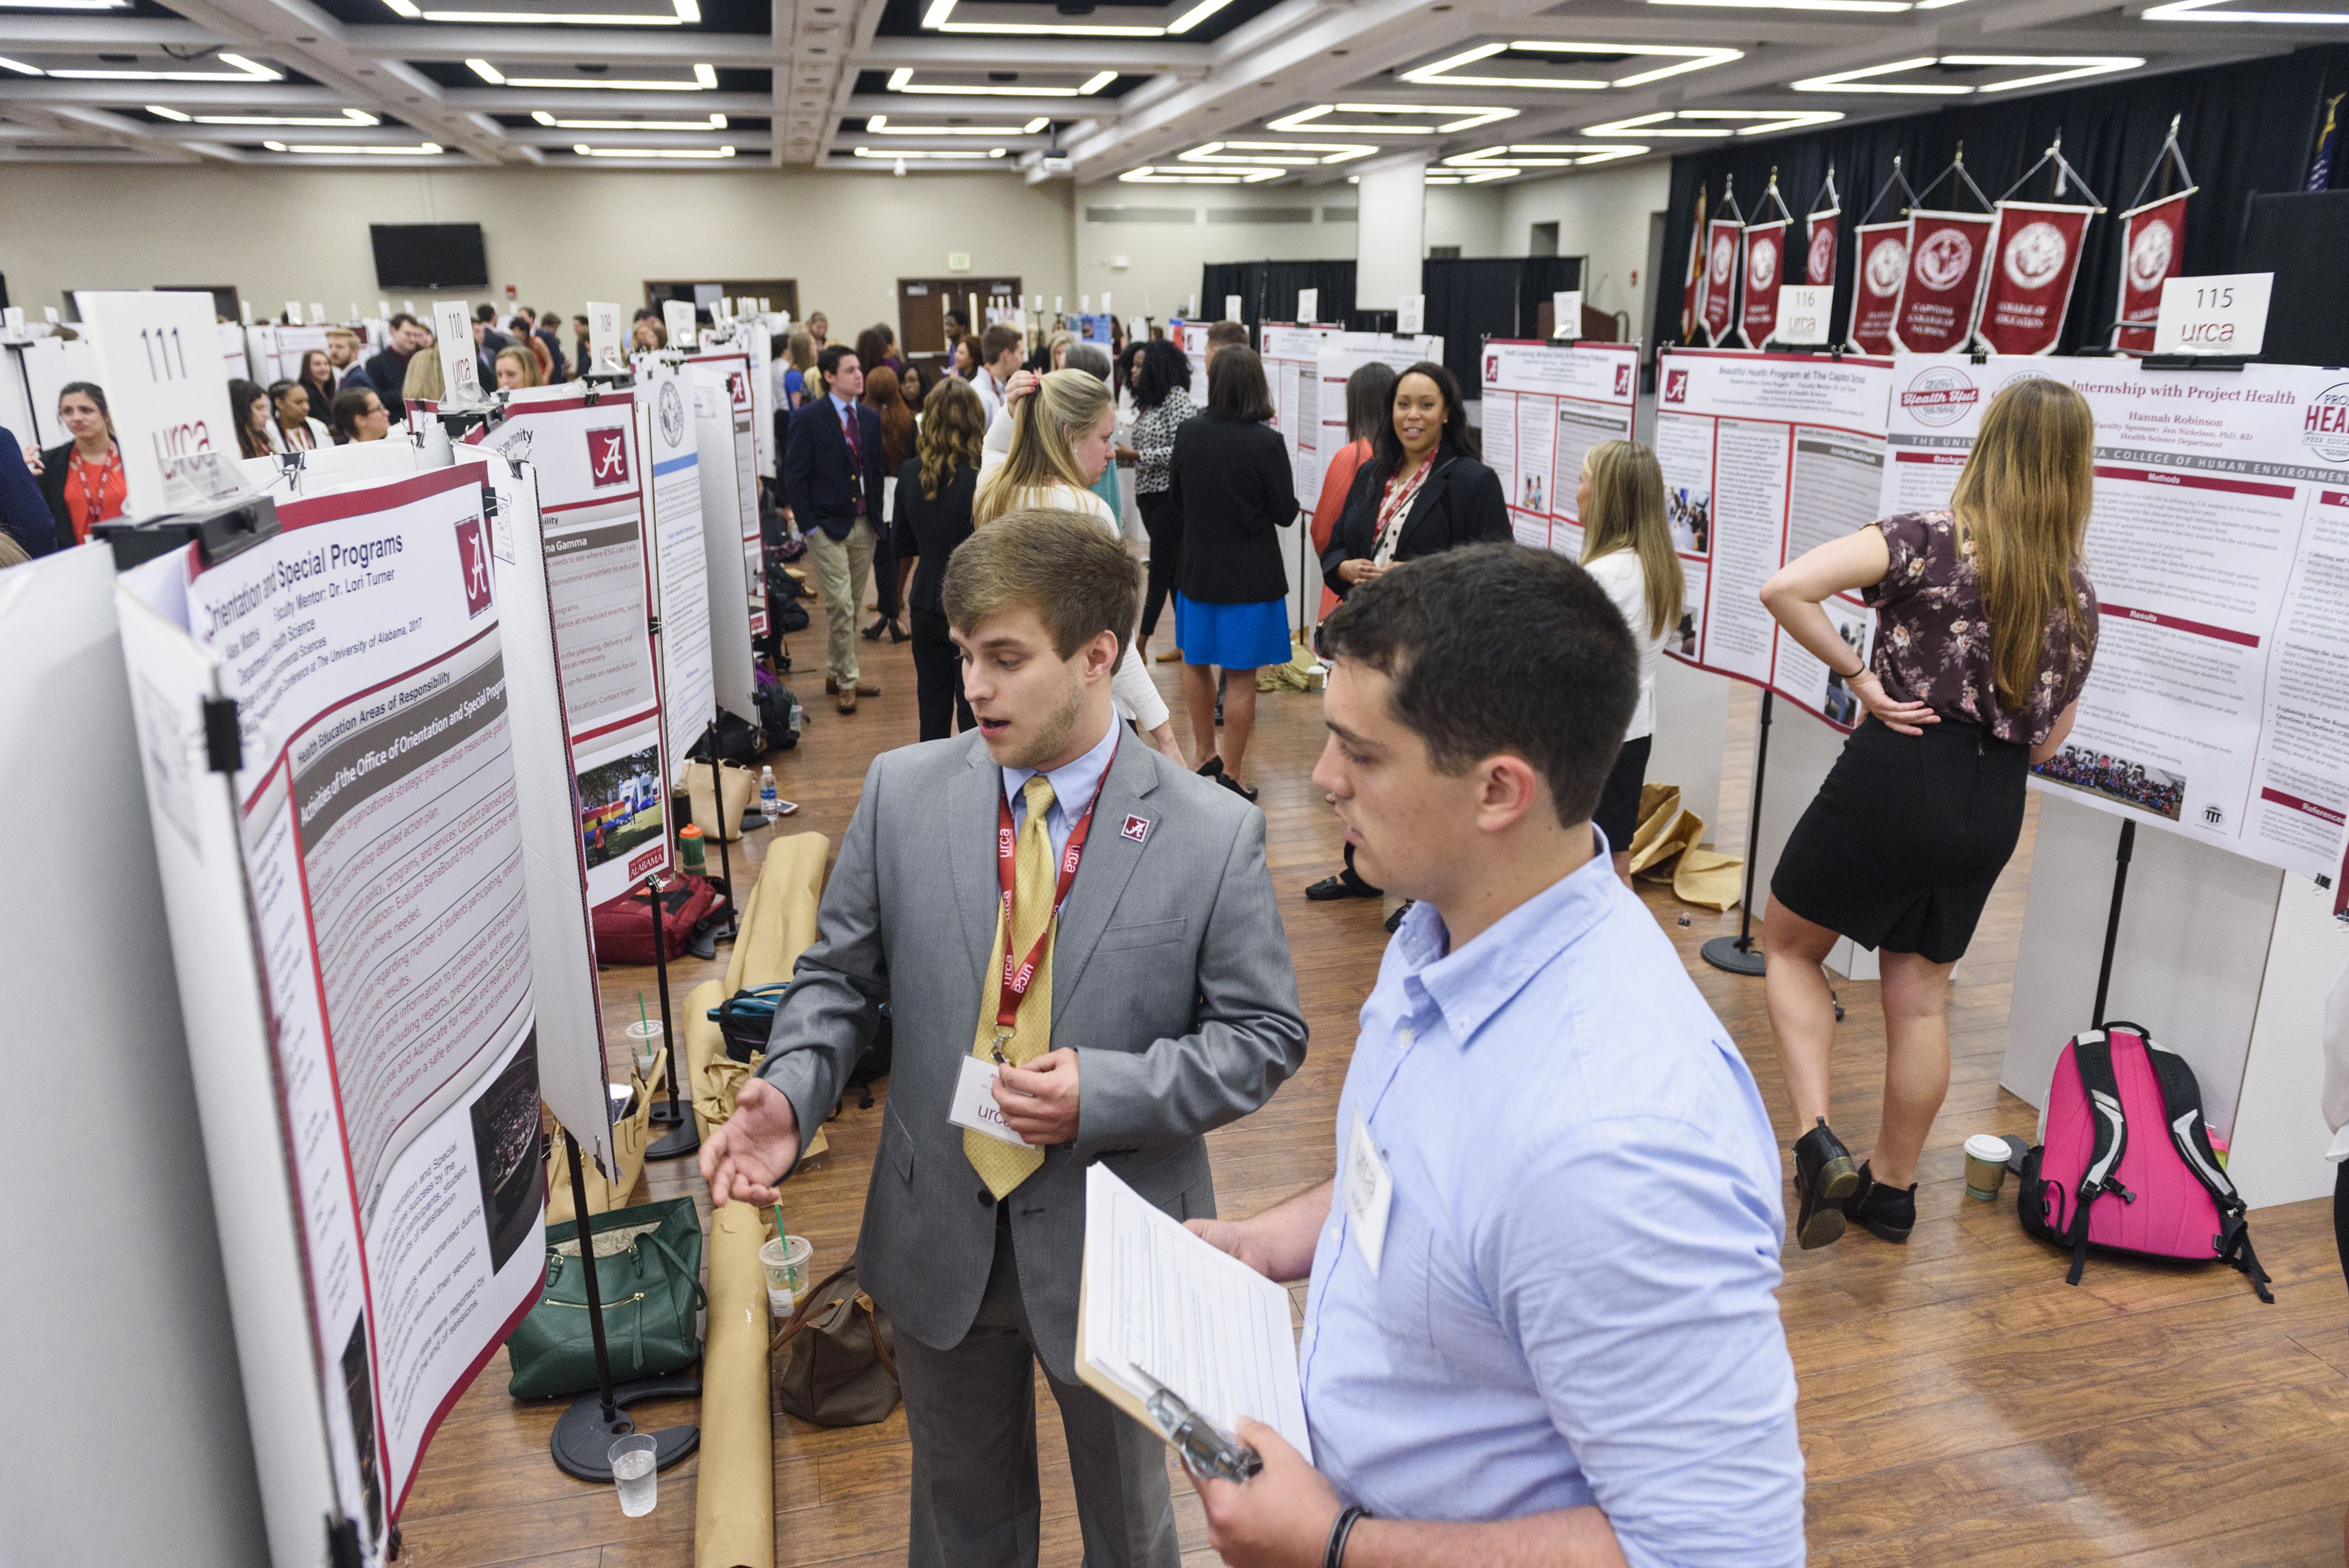 UA Students Highlight Research, Creativity during Annual Conference